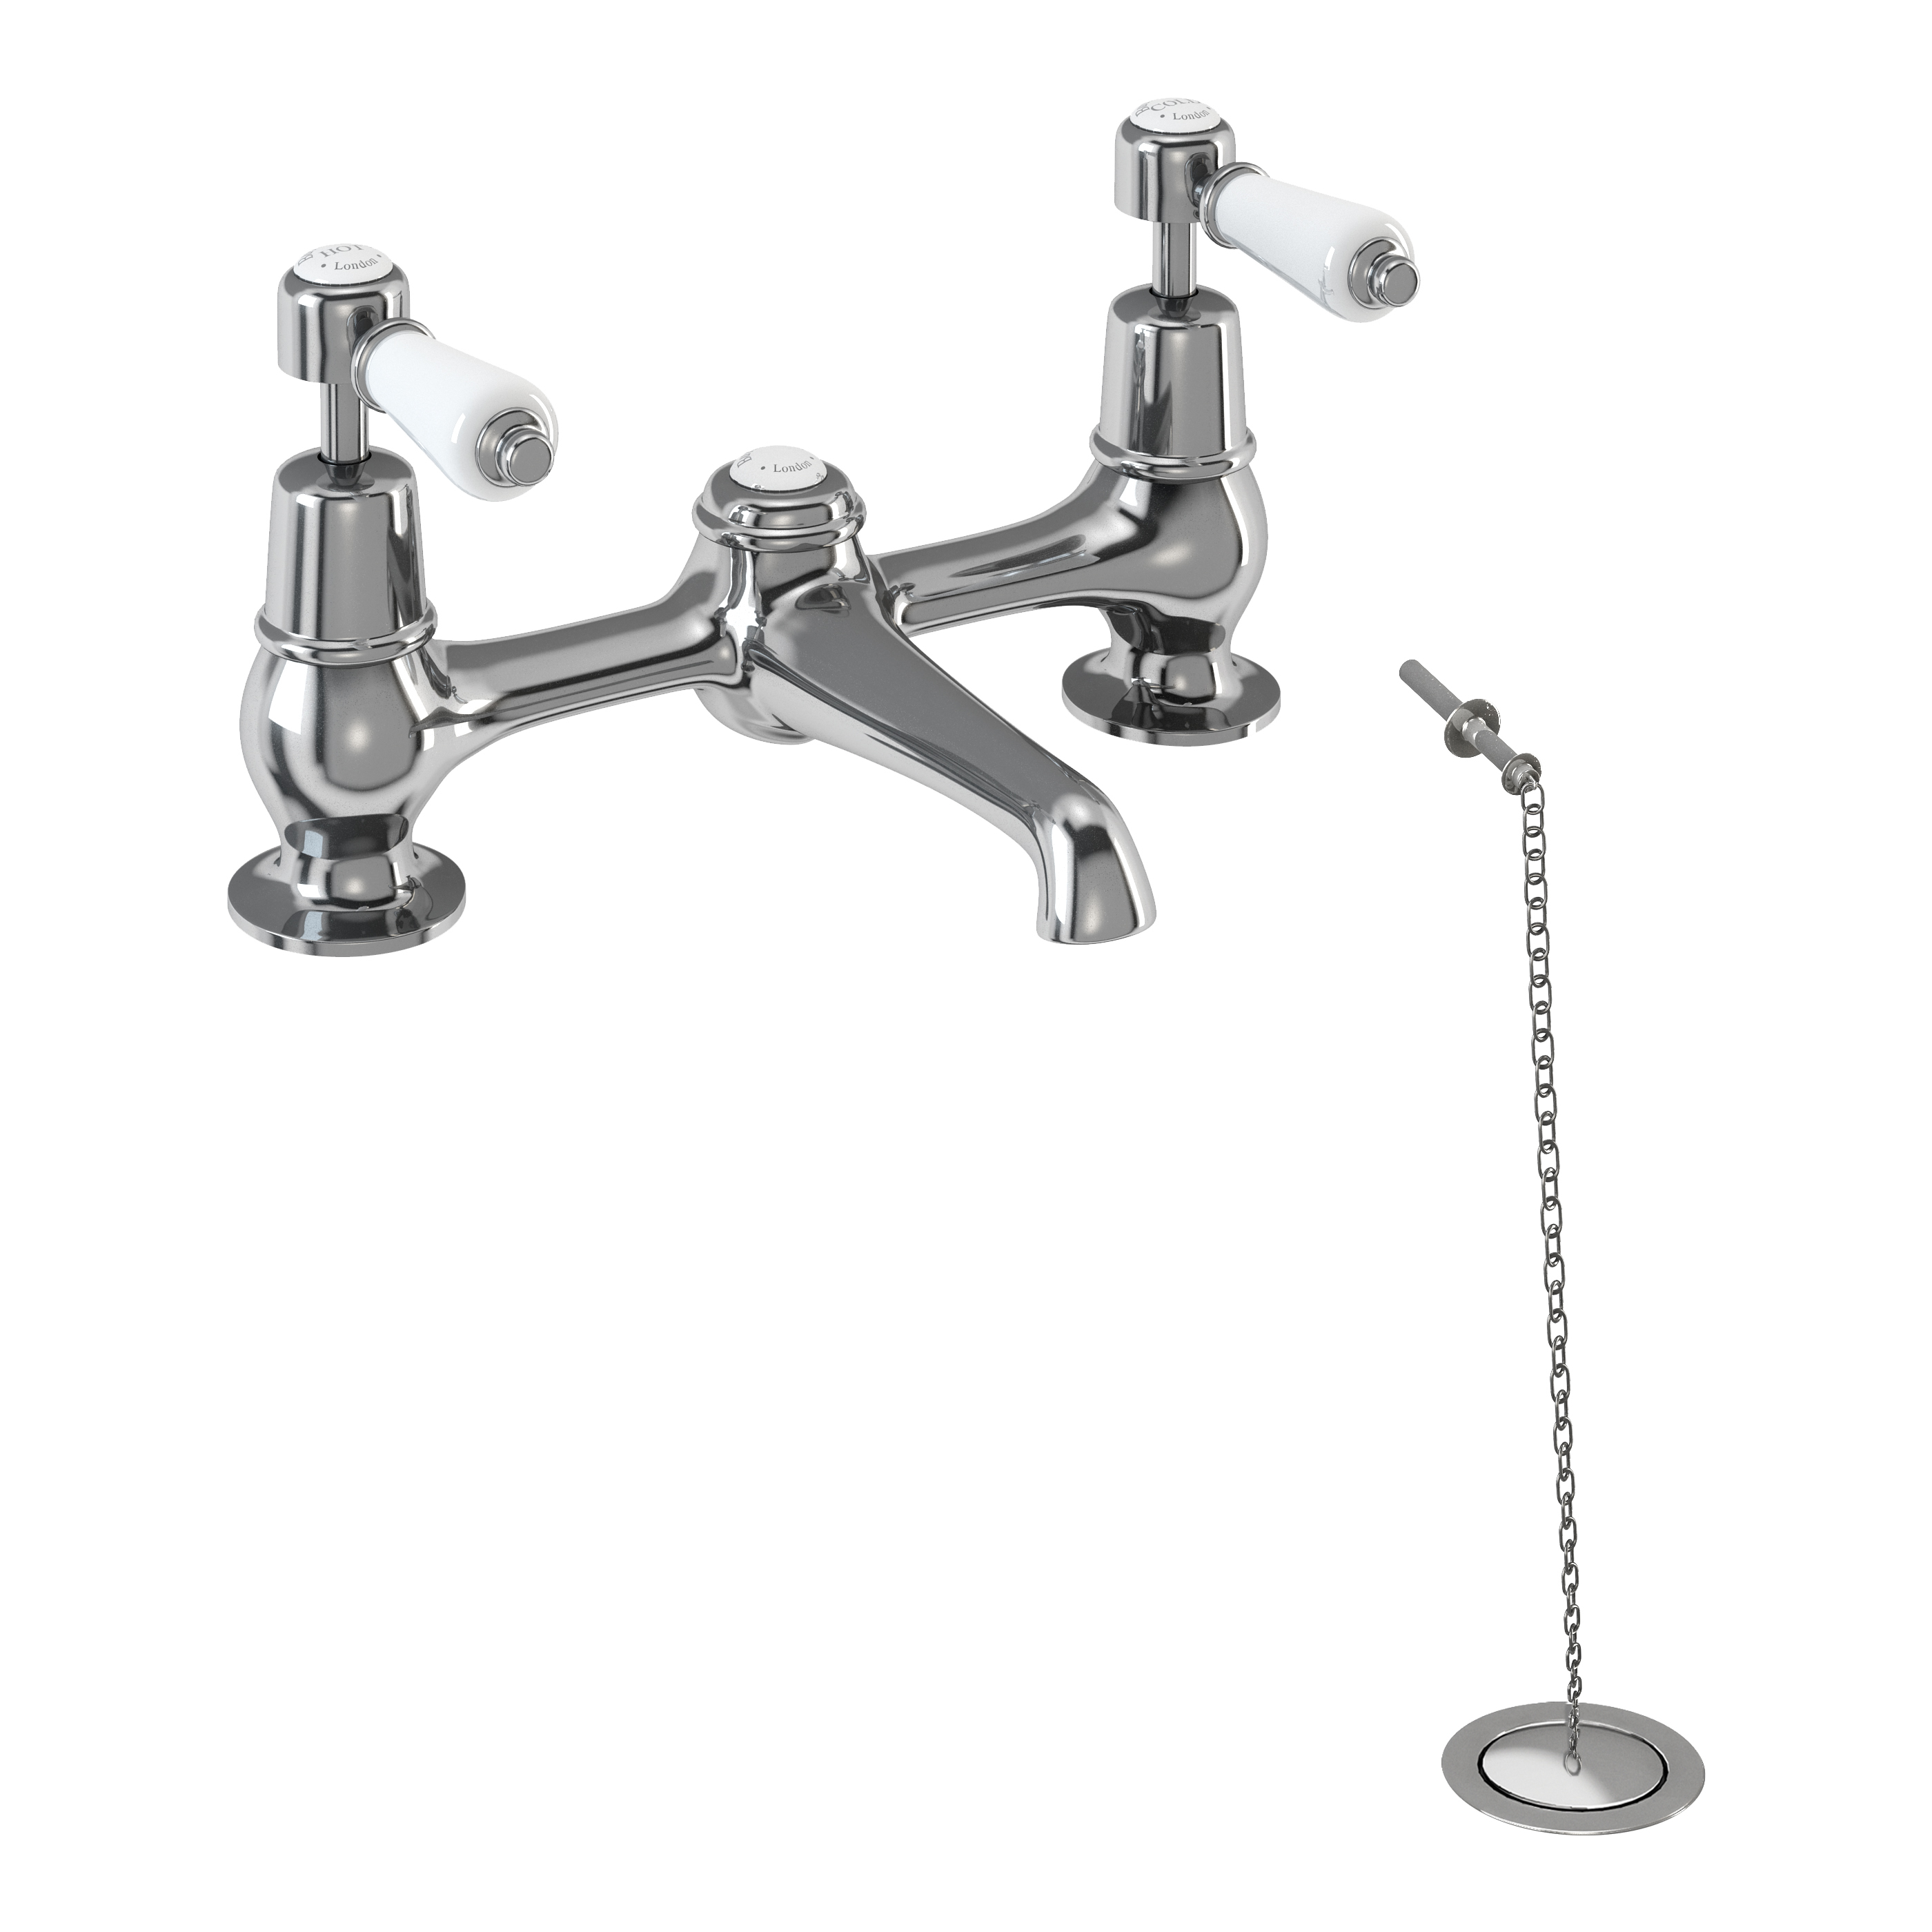 Kensington 2 tap hole bridge basin mixer with low central indice with plug and chain waste with swivel spout